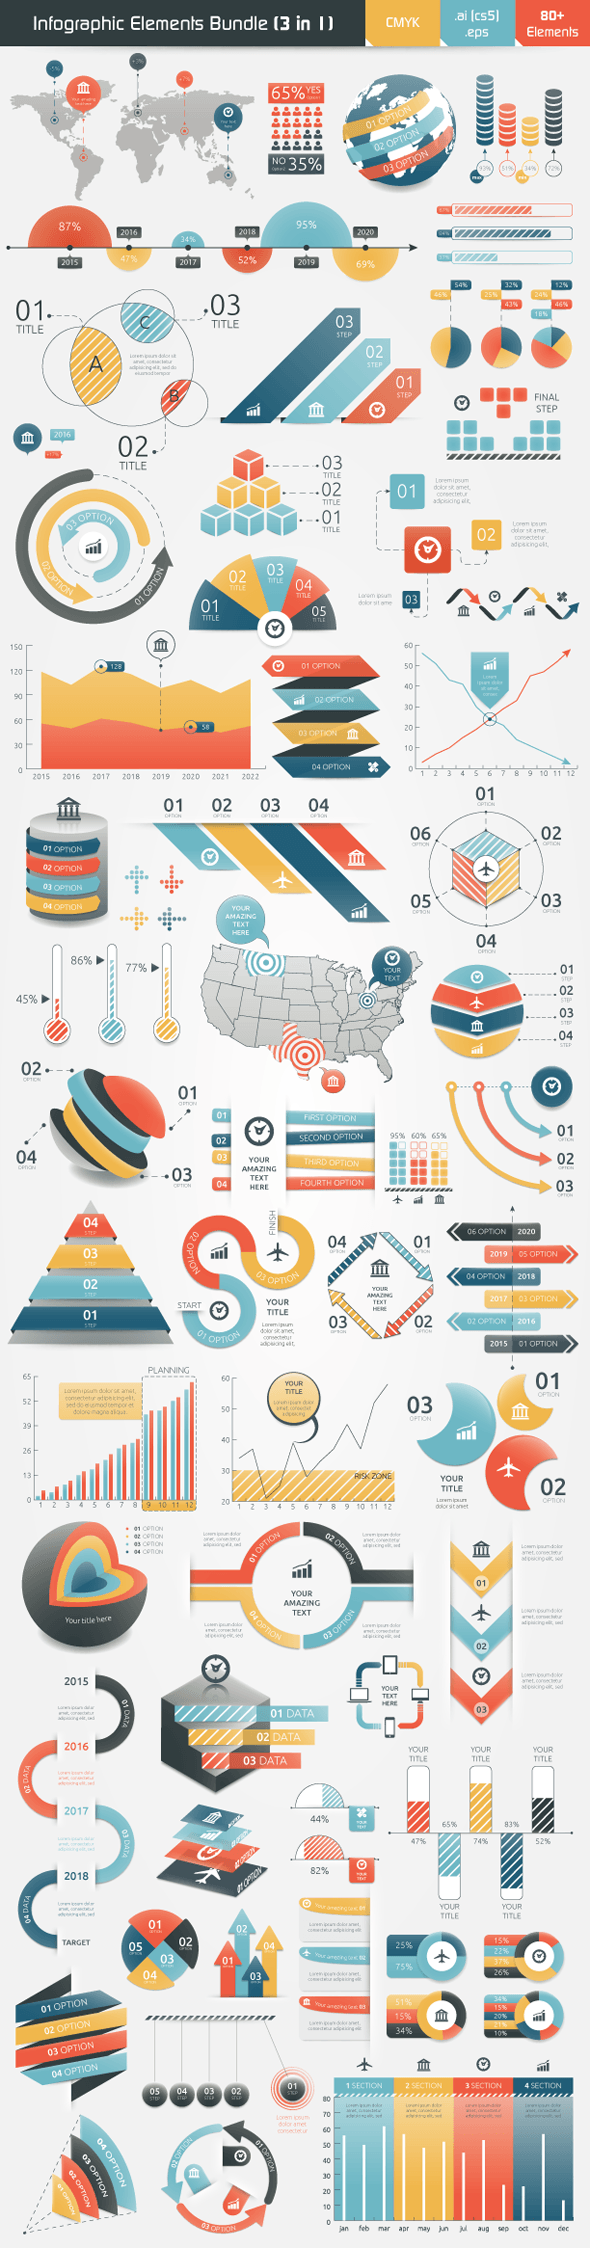 Infographic Elements Bundle (3 in 1)